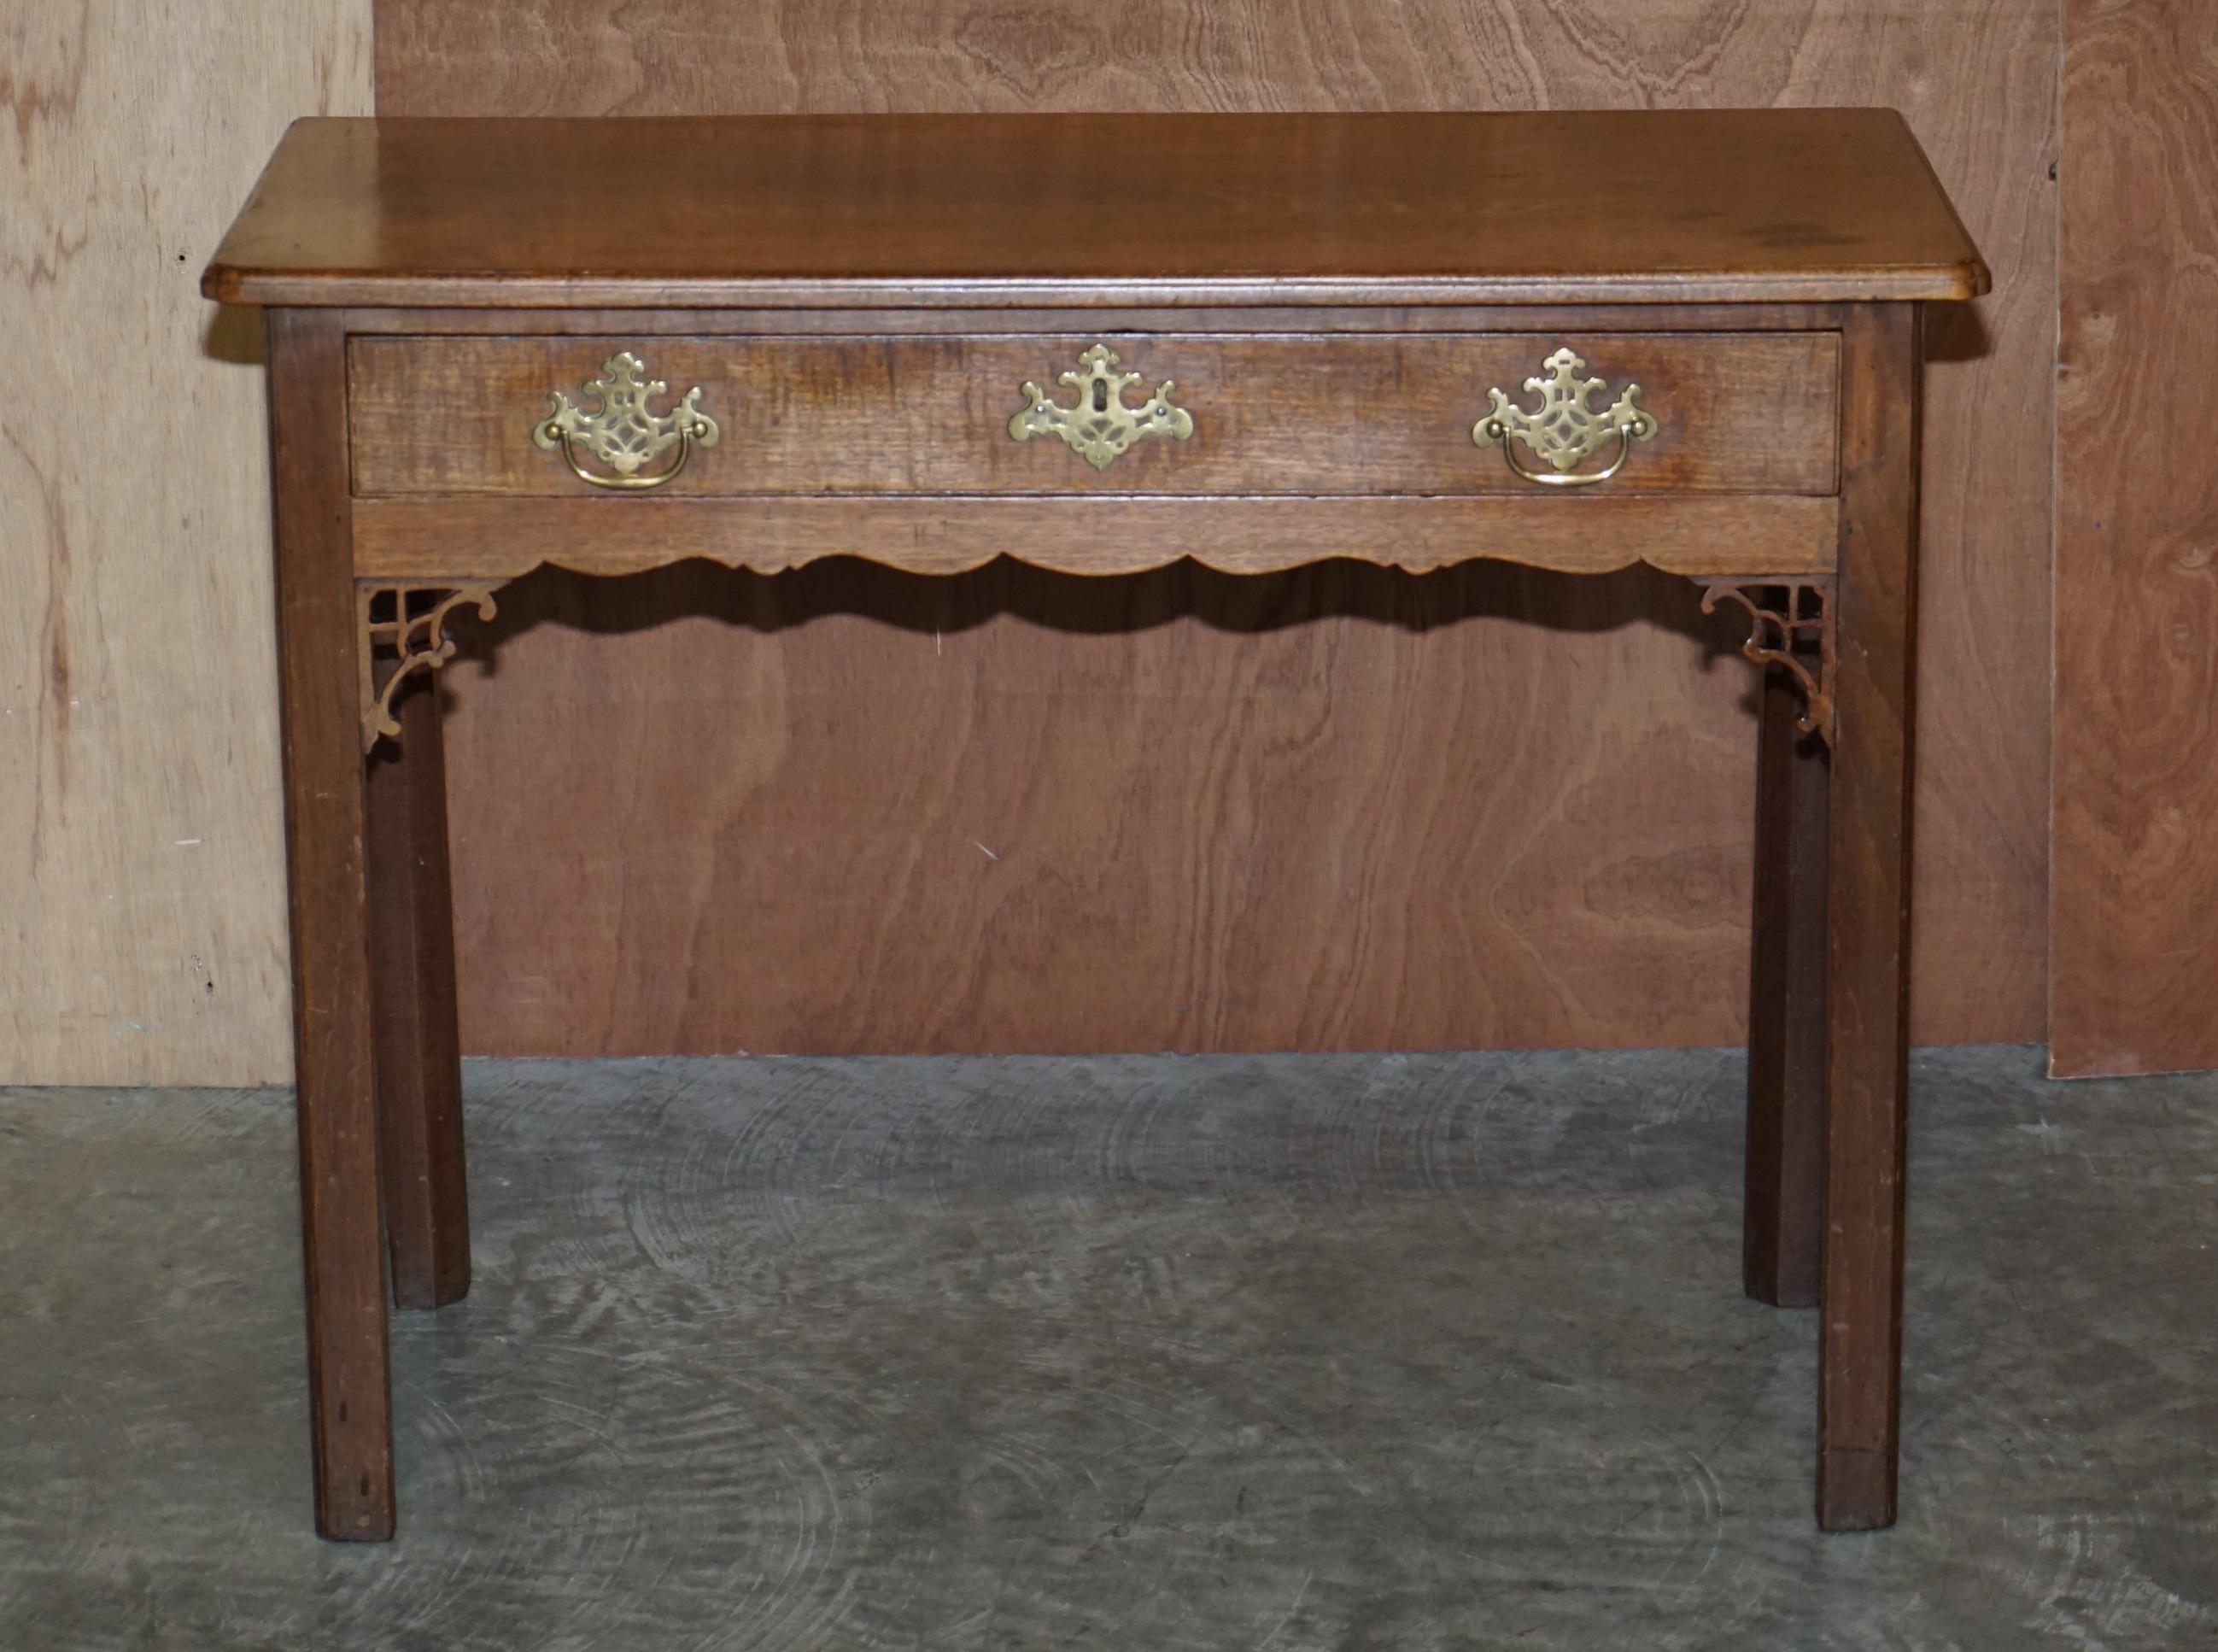 We are delighted to offer for sale this exceptional George III solid mahogany with original brass fittings single drawer side table with Thomas Chippendale style carvings

This piece is sublime, it weighs around twice what it looks like it should,